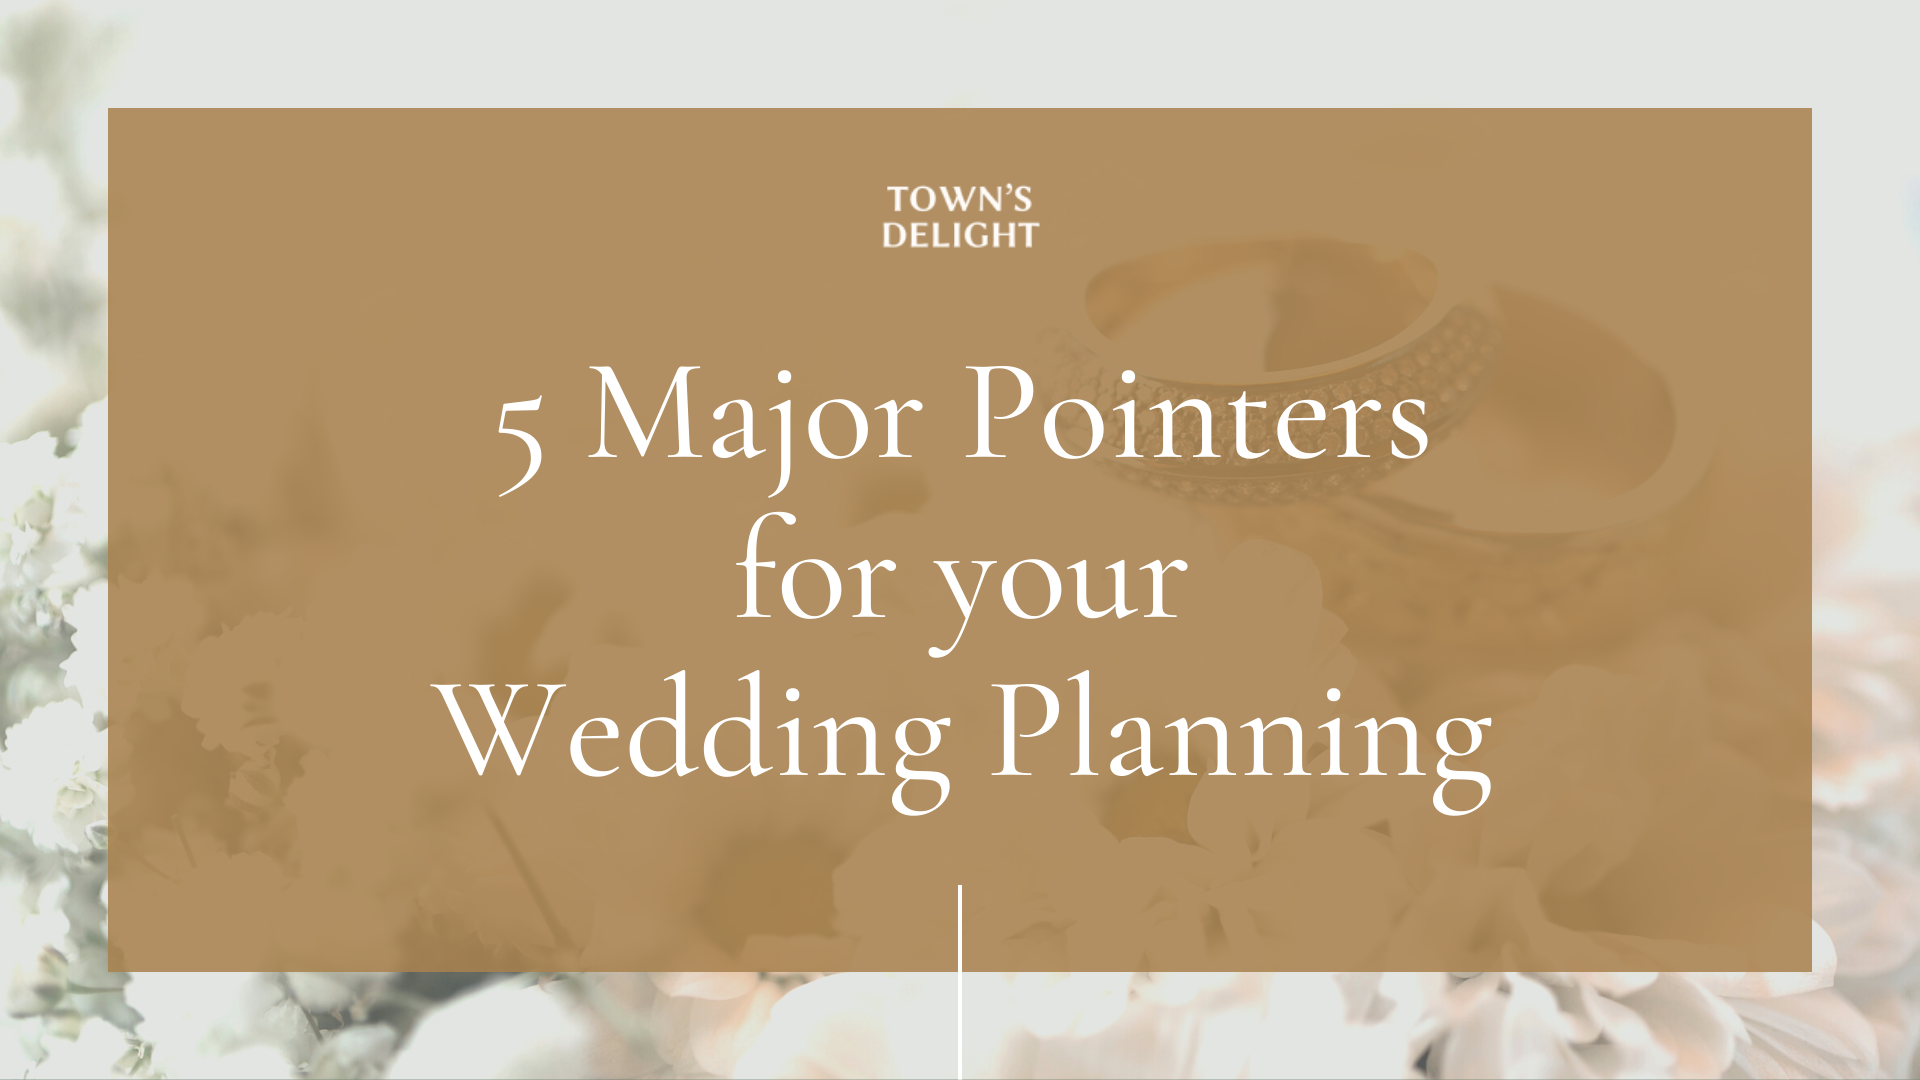 Town's Delight Wedding Planning Guide Philippines Cavite 1